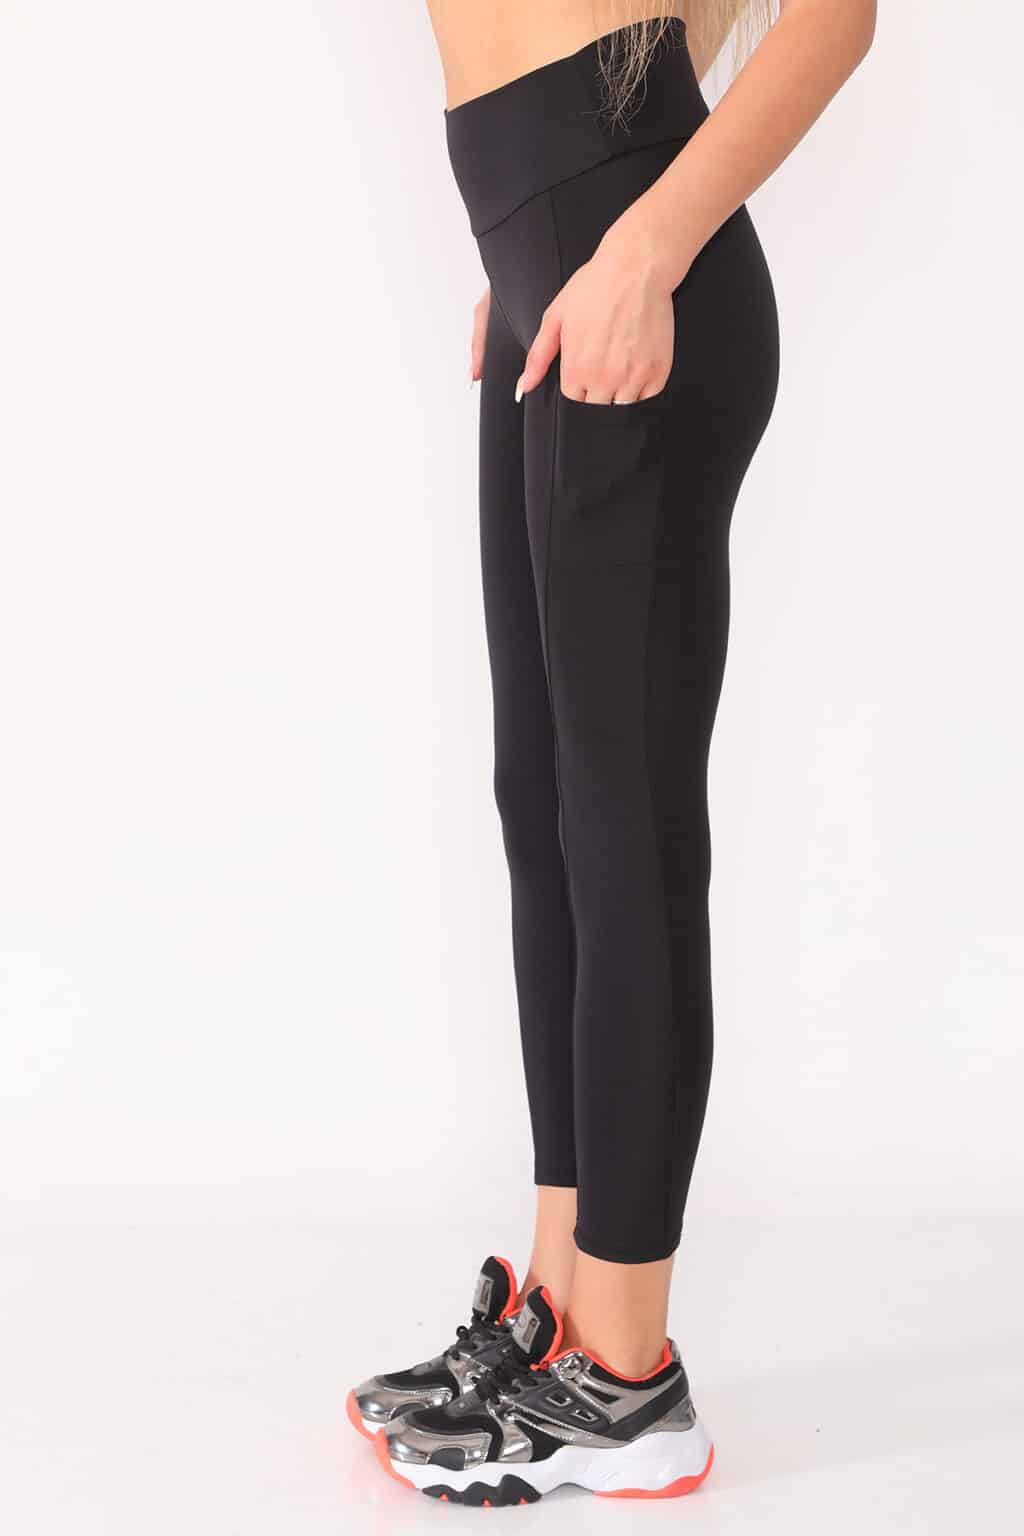 Active Wear High Waisted Black Color Yoga Pants with Side Pockets